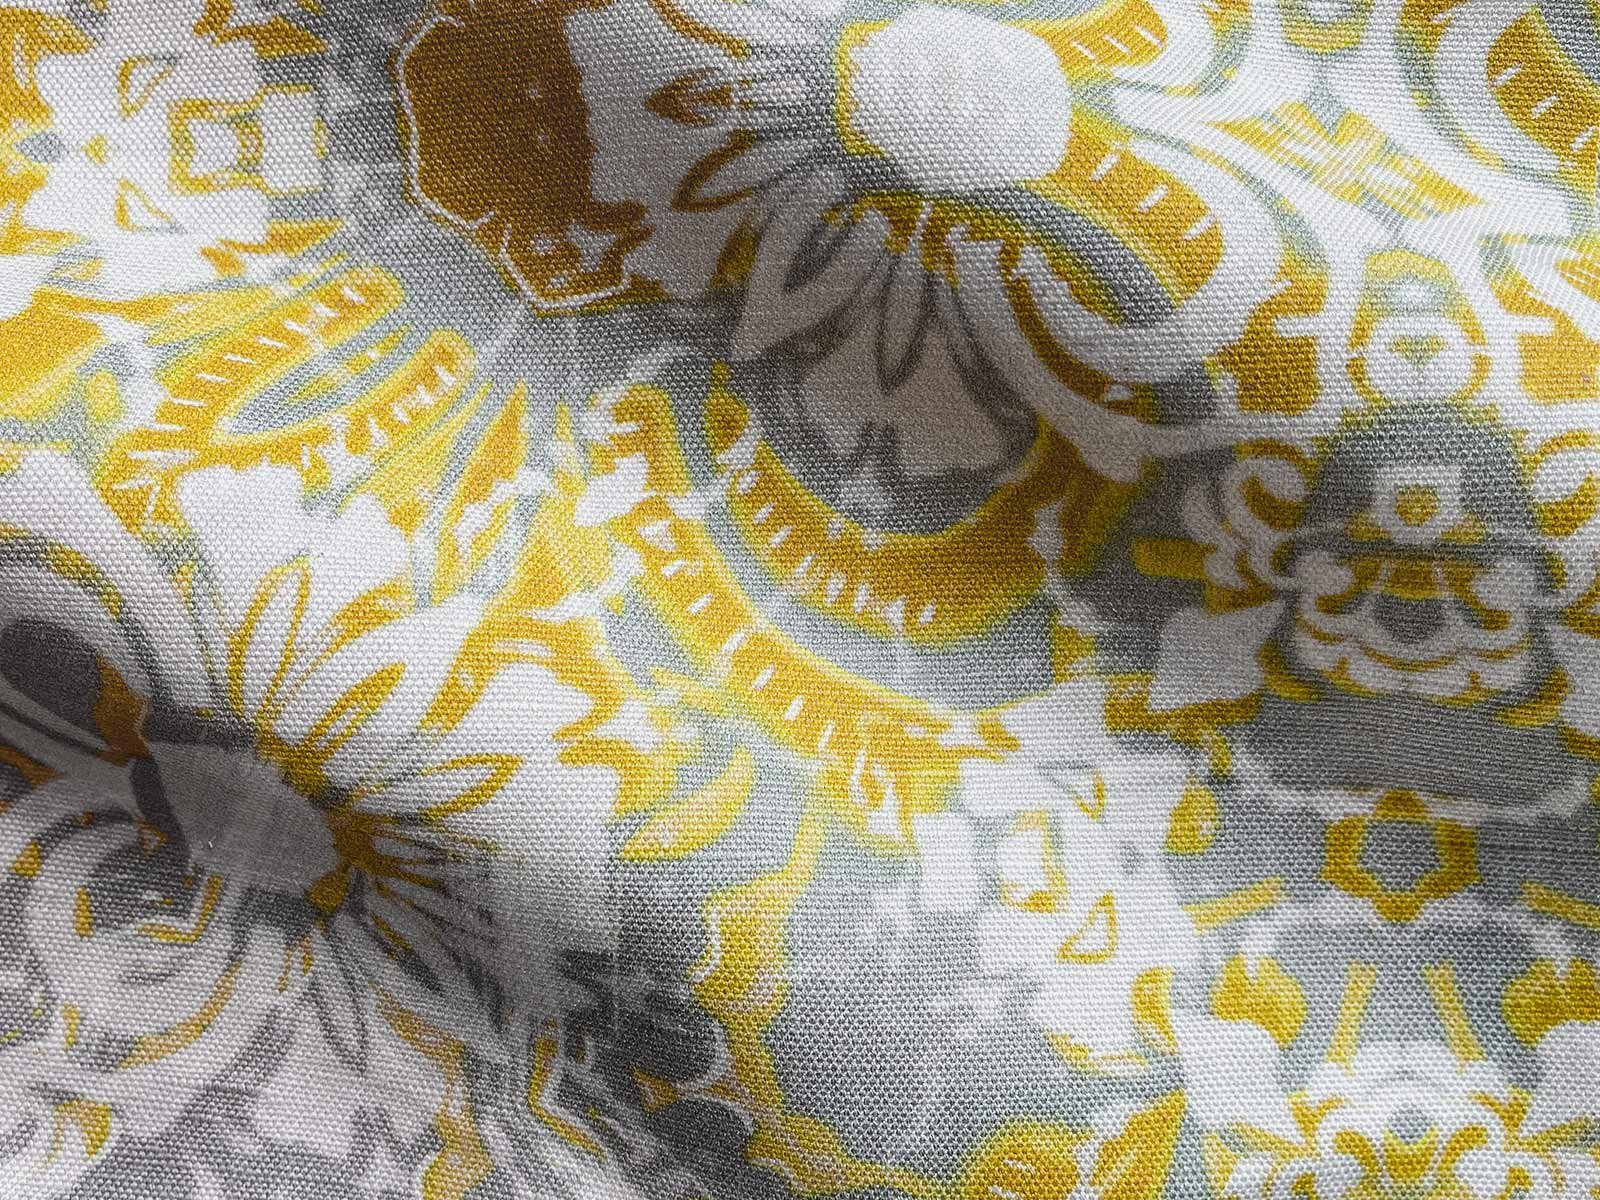 Carmen-Inlay-Pearl-and-Maude-yellow-grey-abstract-floral-fabric-detail.jpg